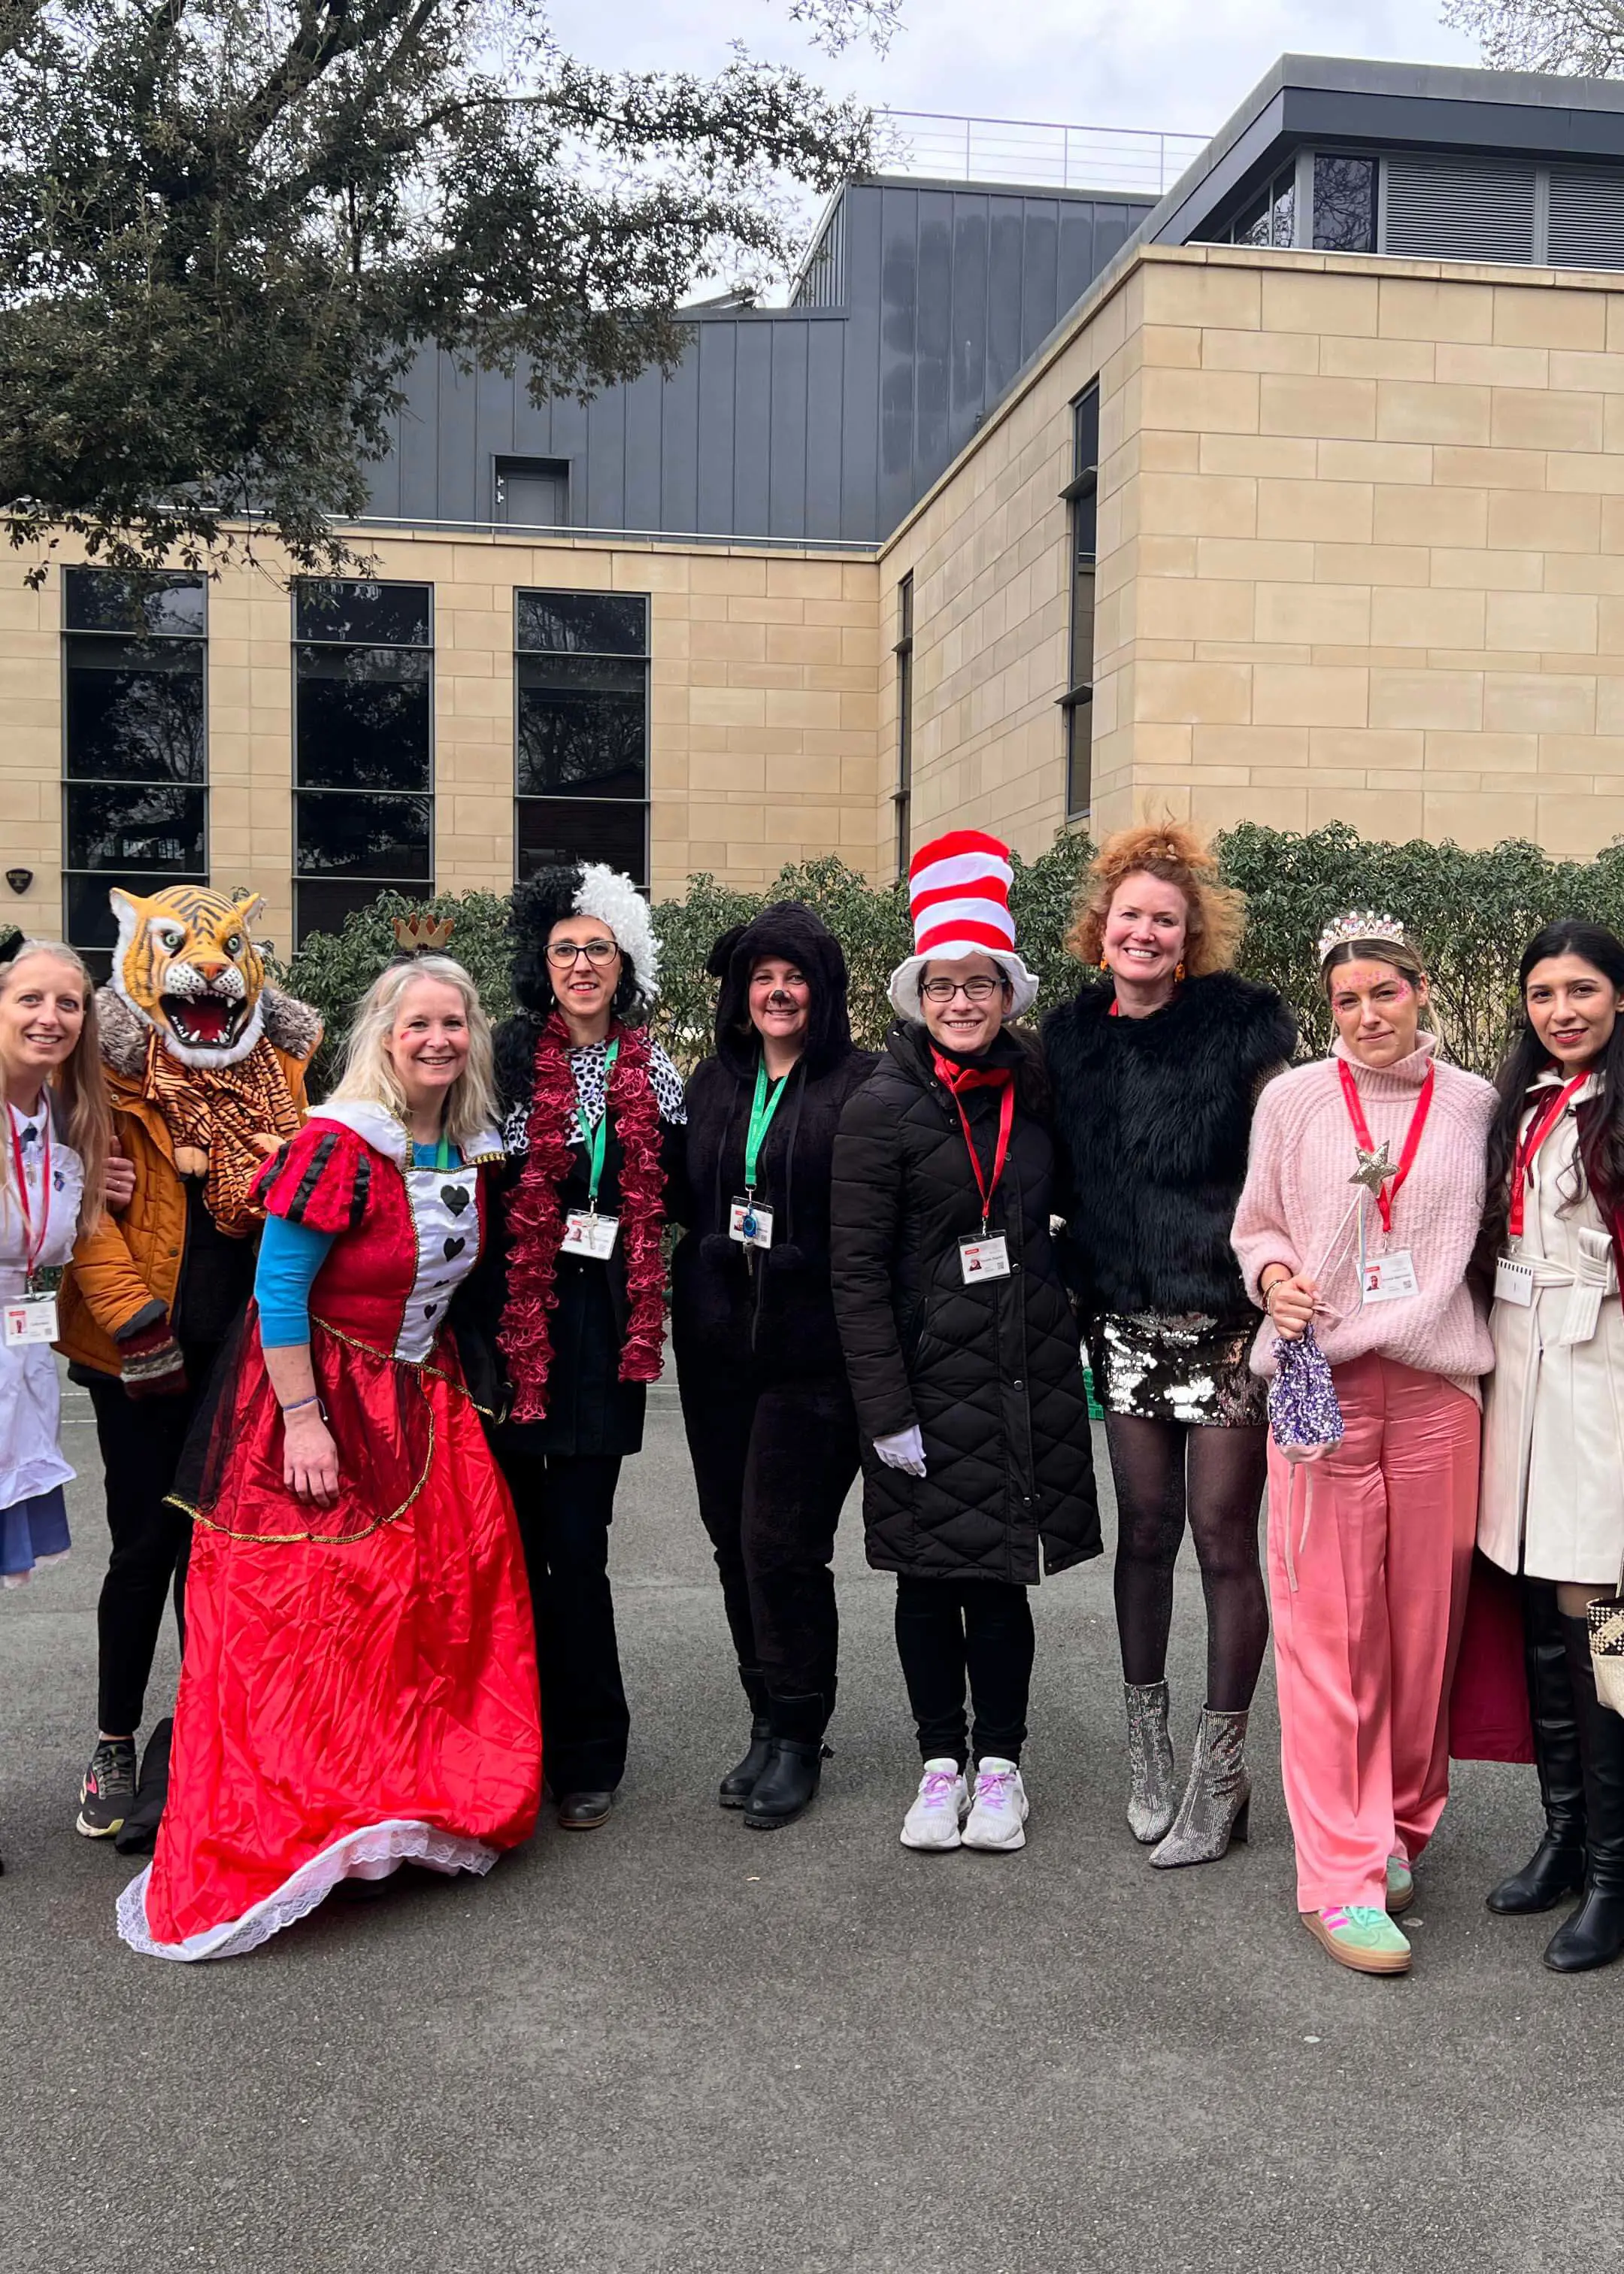 FIPS dressed up for world book day at Ibstock Place School, Roehampton, a private school near Richmond, Barnes, Putney, Kingston, & Wandsworth